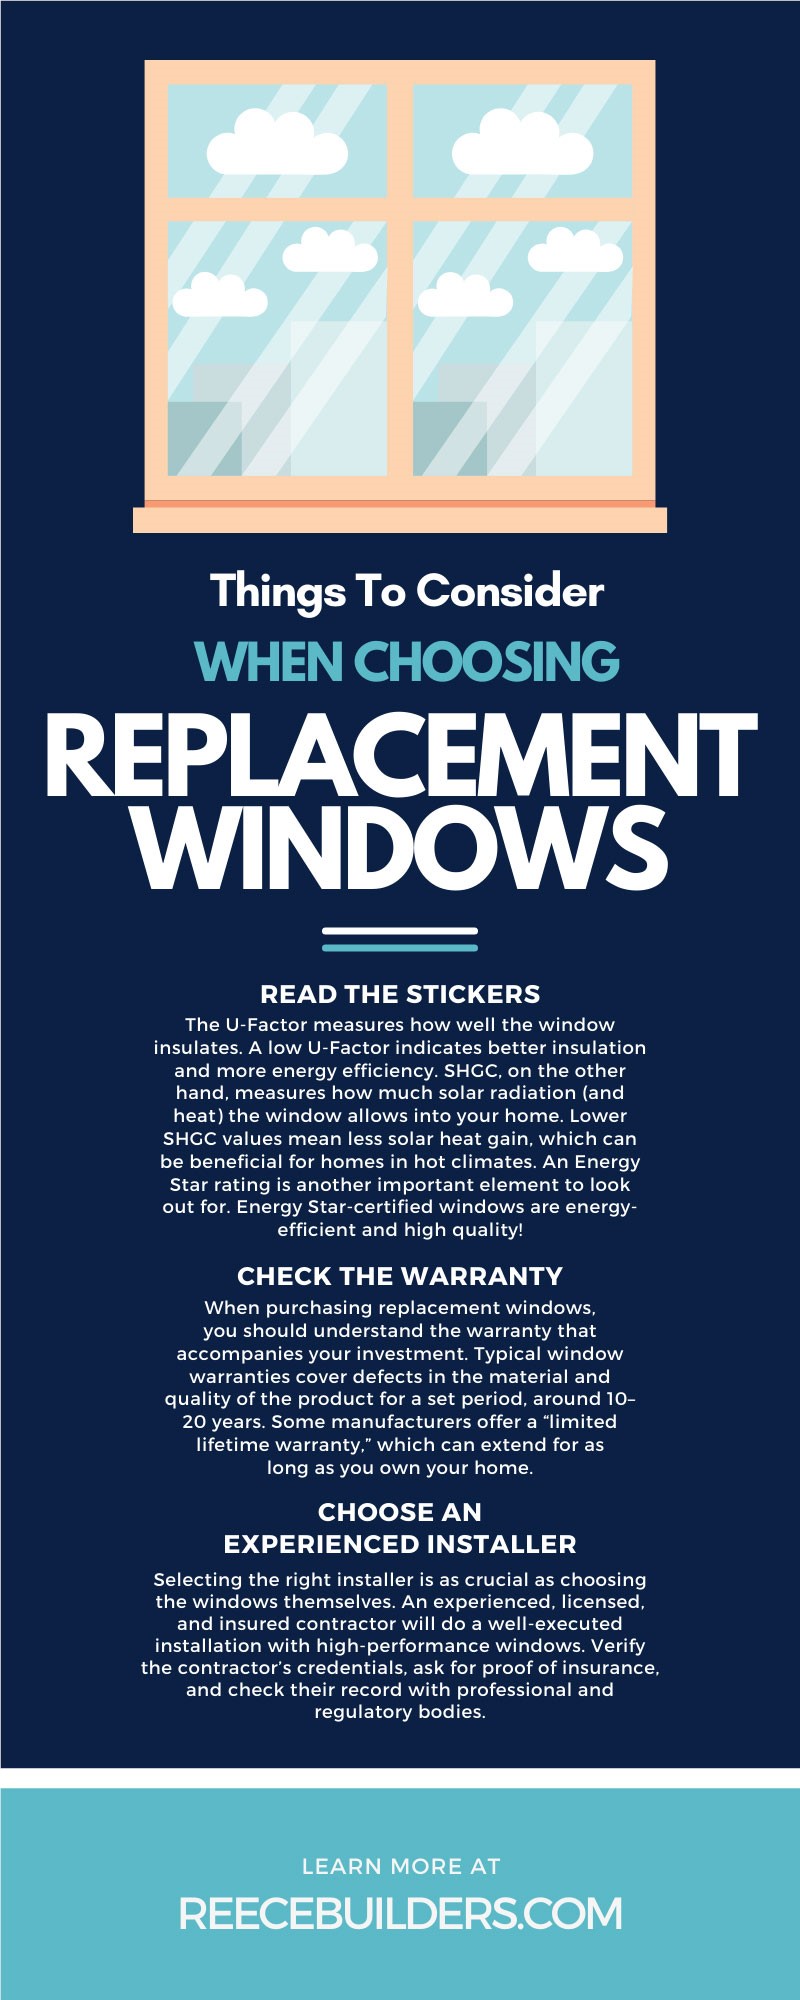 Things To Consider When Choosing Replacement Windows